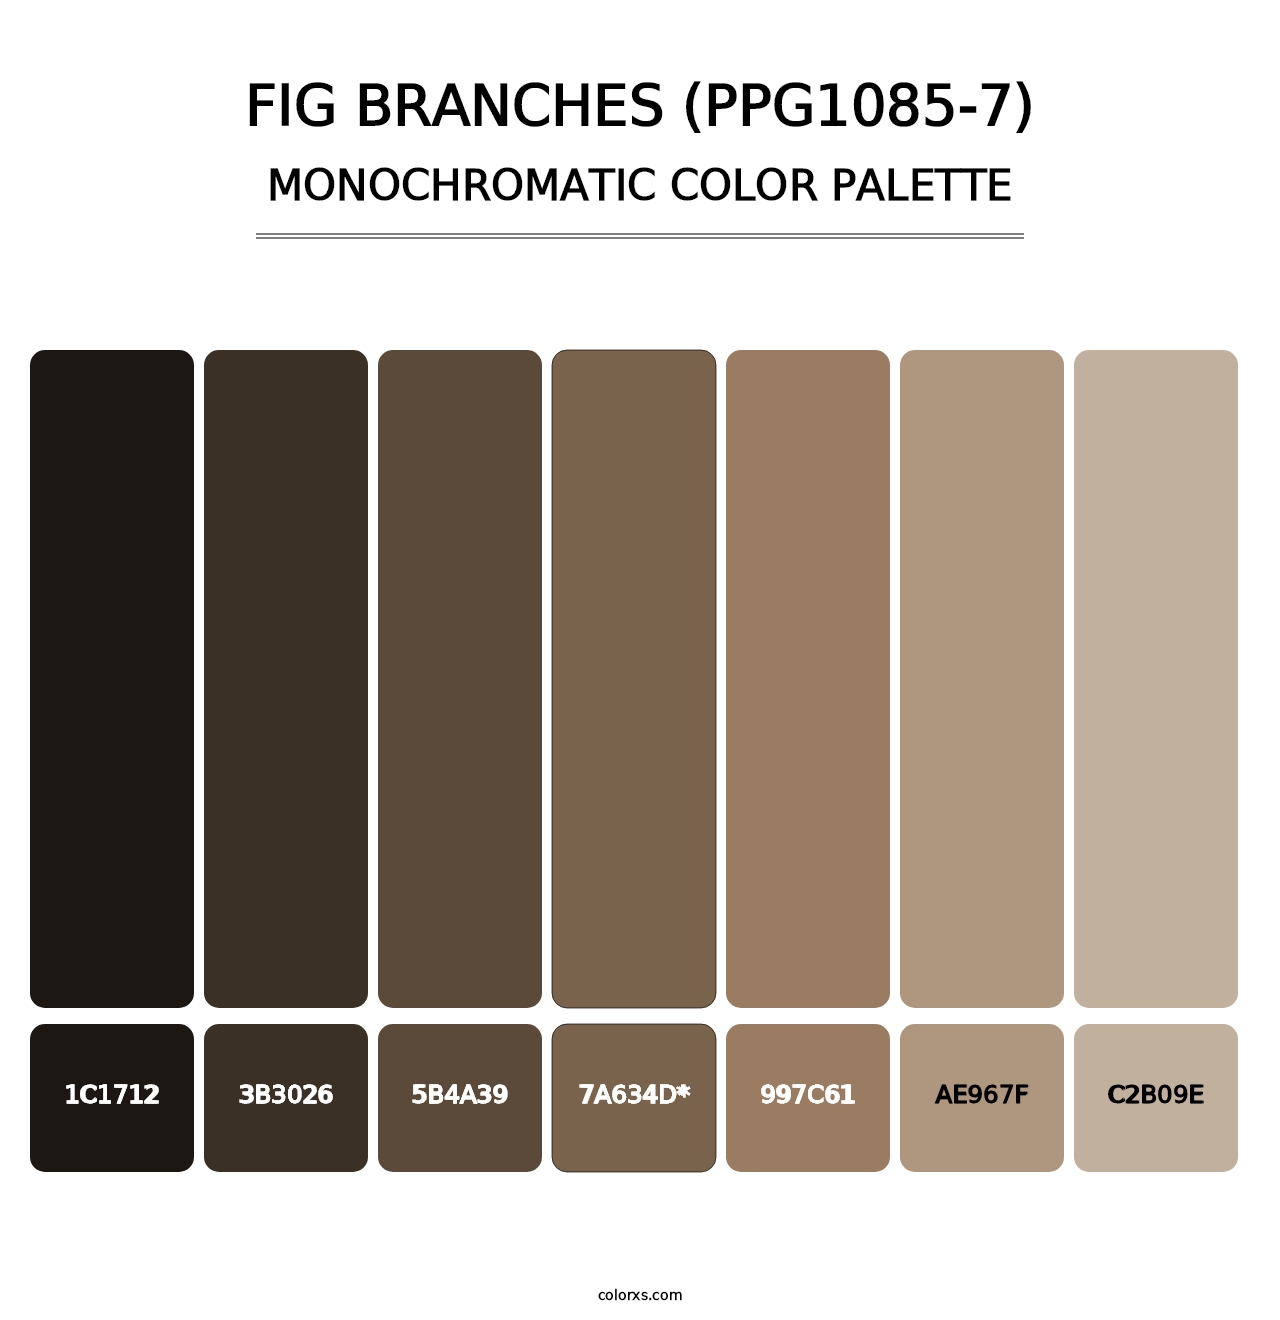 Fig Branches (PPG1085-7) - Monochromatic Color Palette